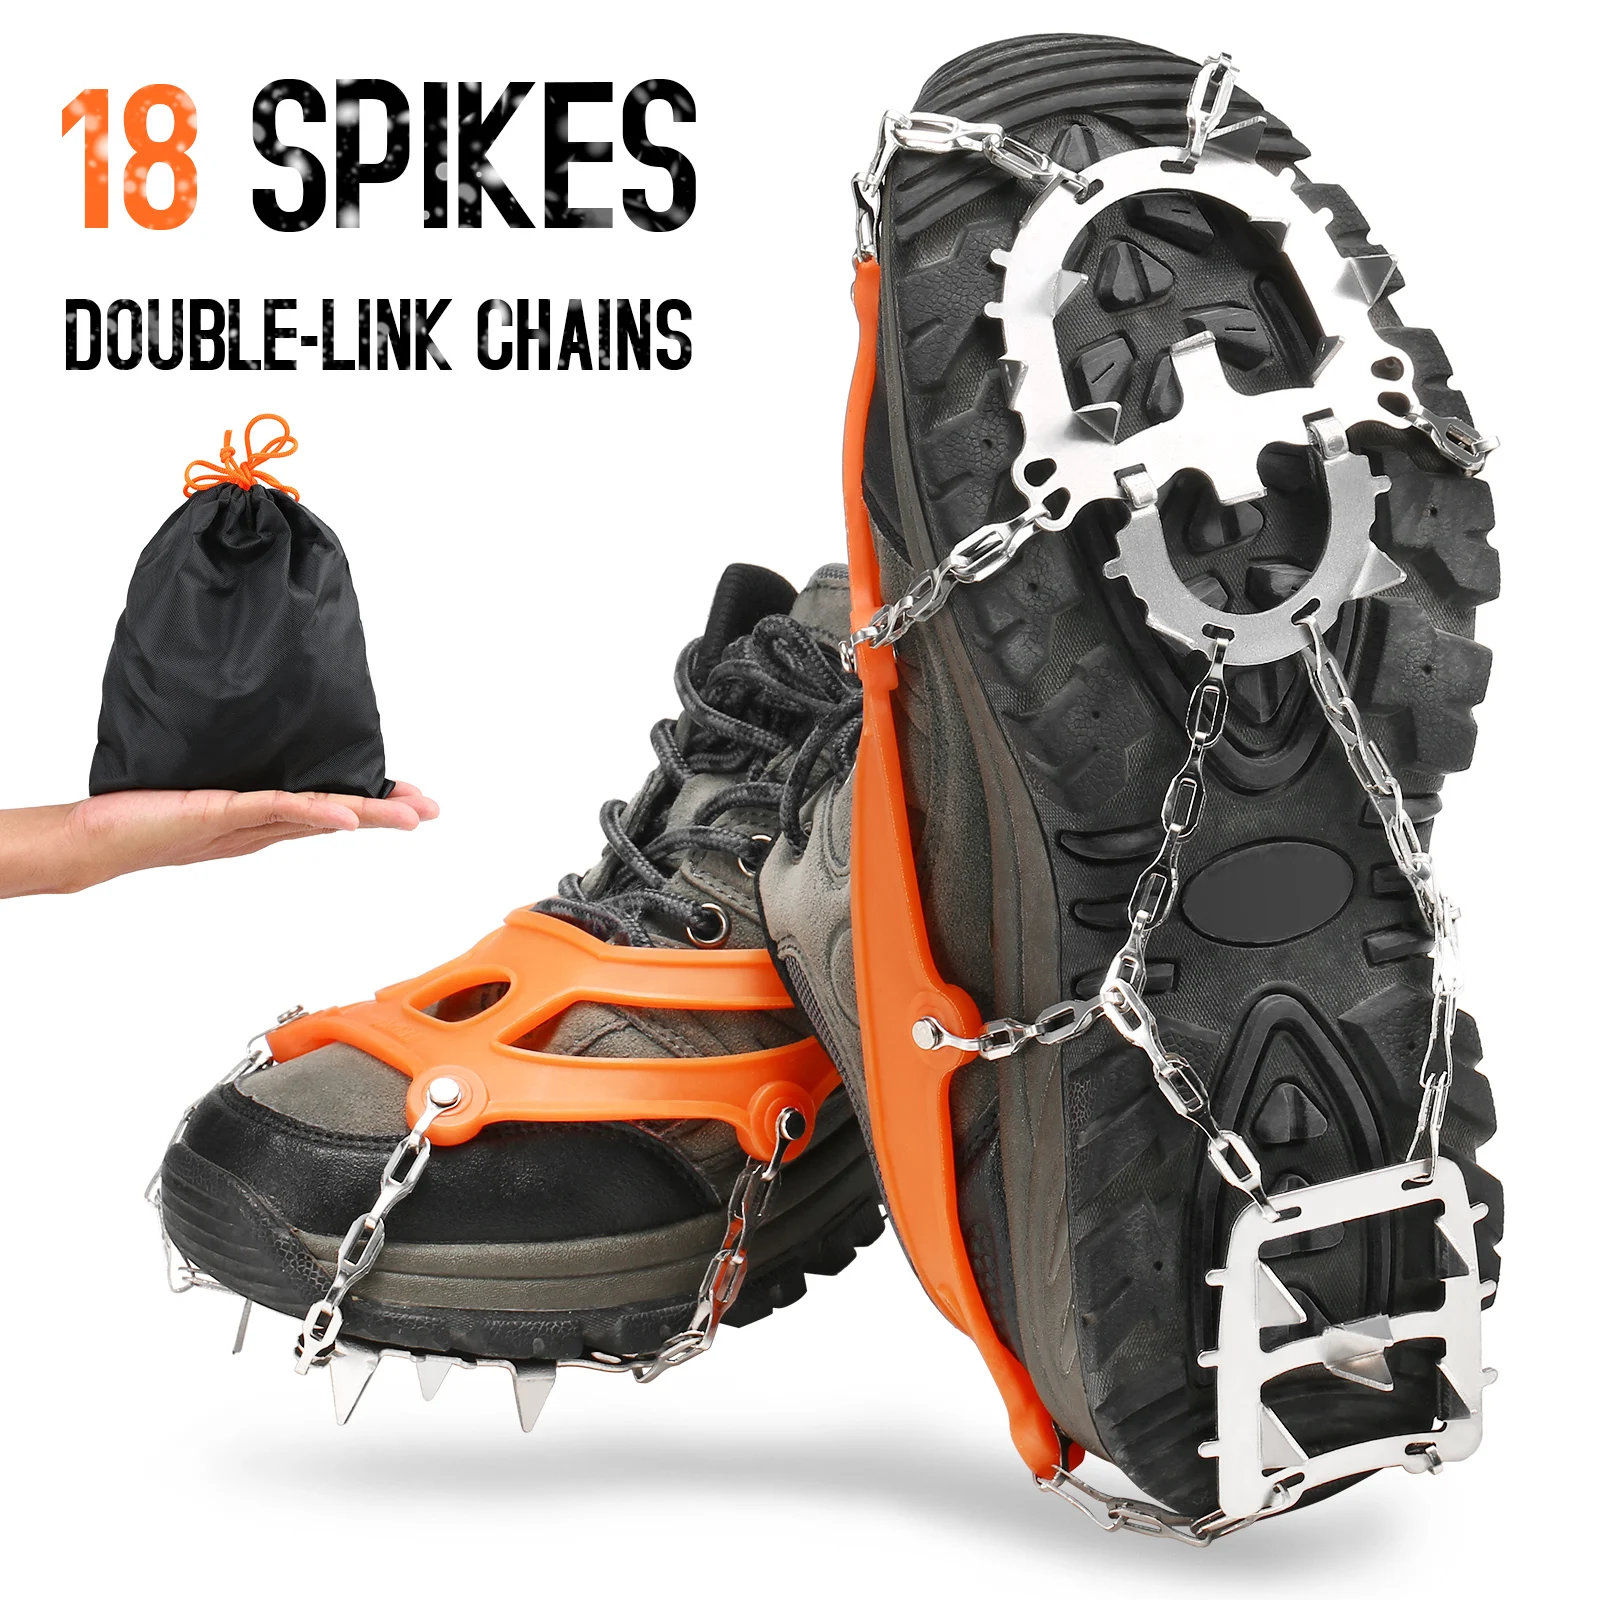 6 Teeth Anti Slip Snow Shoe Crampon Traction Spikes Cleats Outdoors Black 